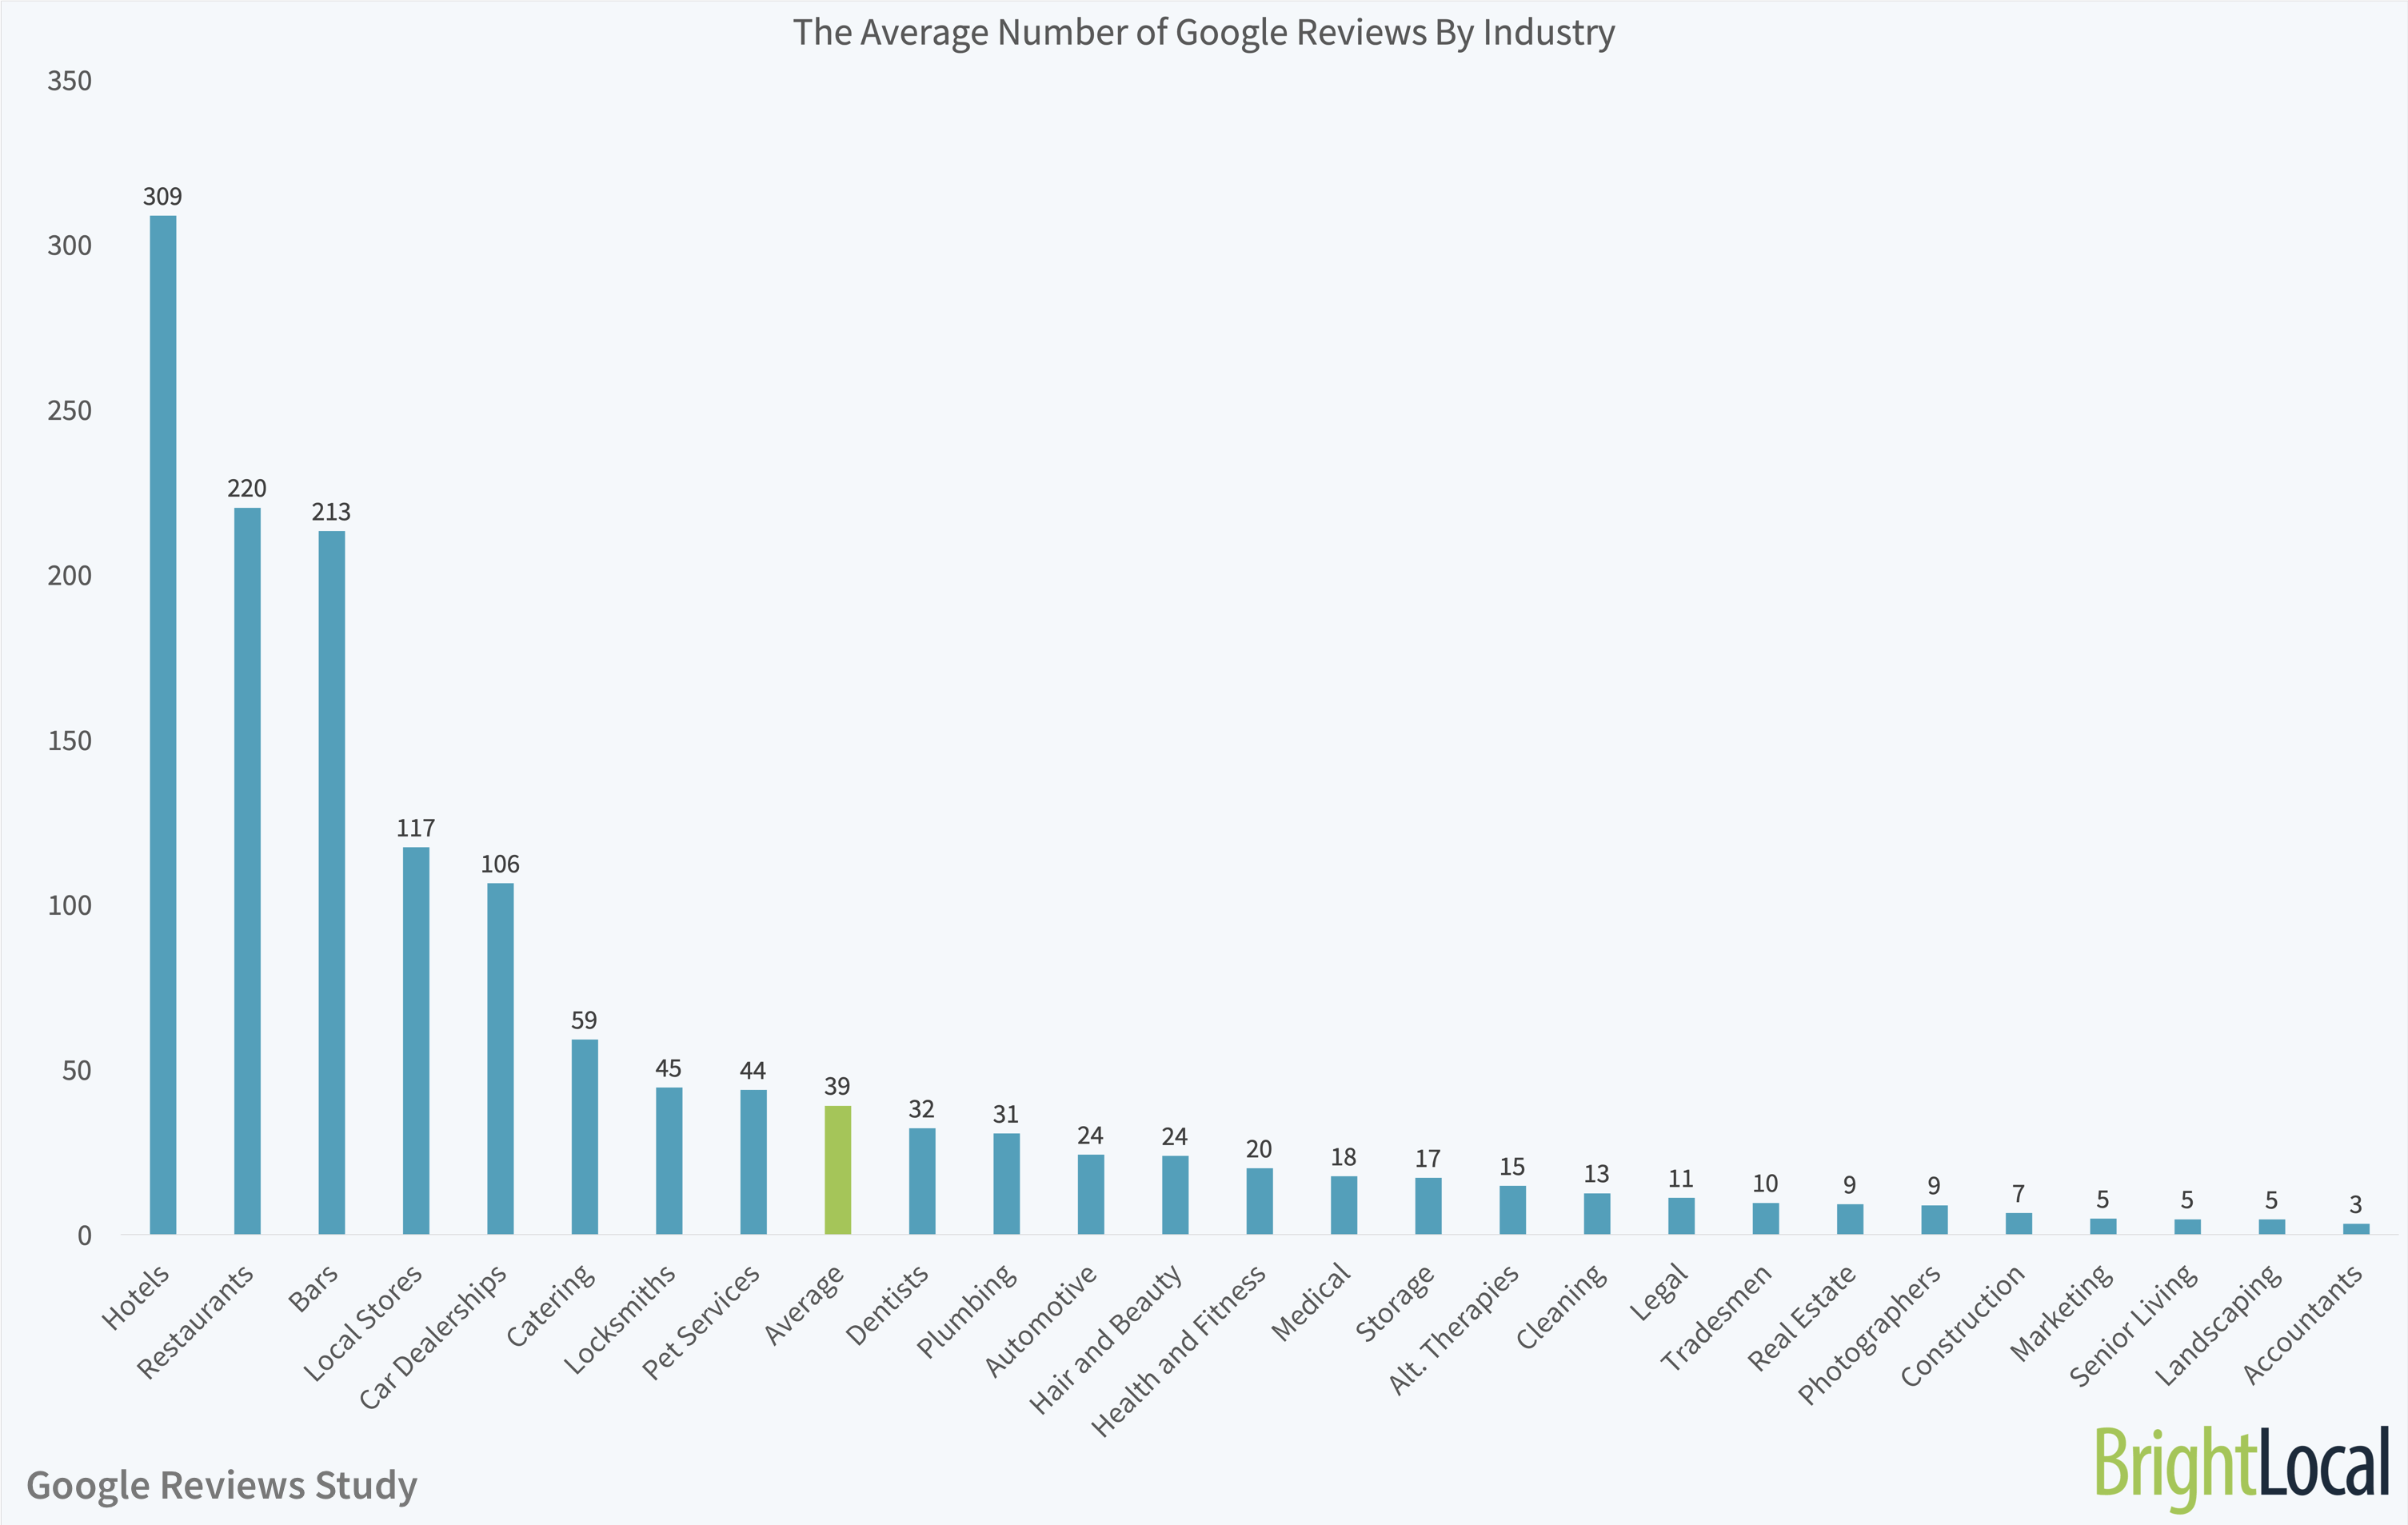 avg number of google reviews by industry